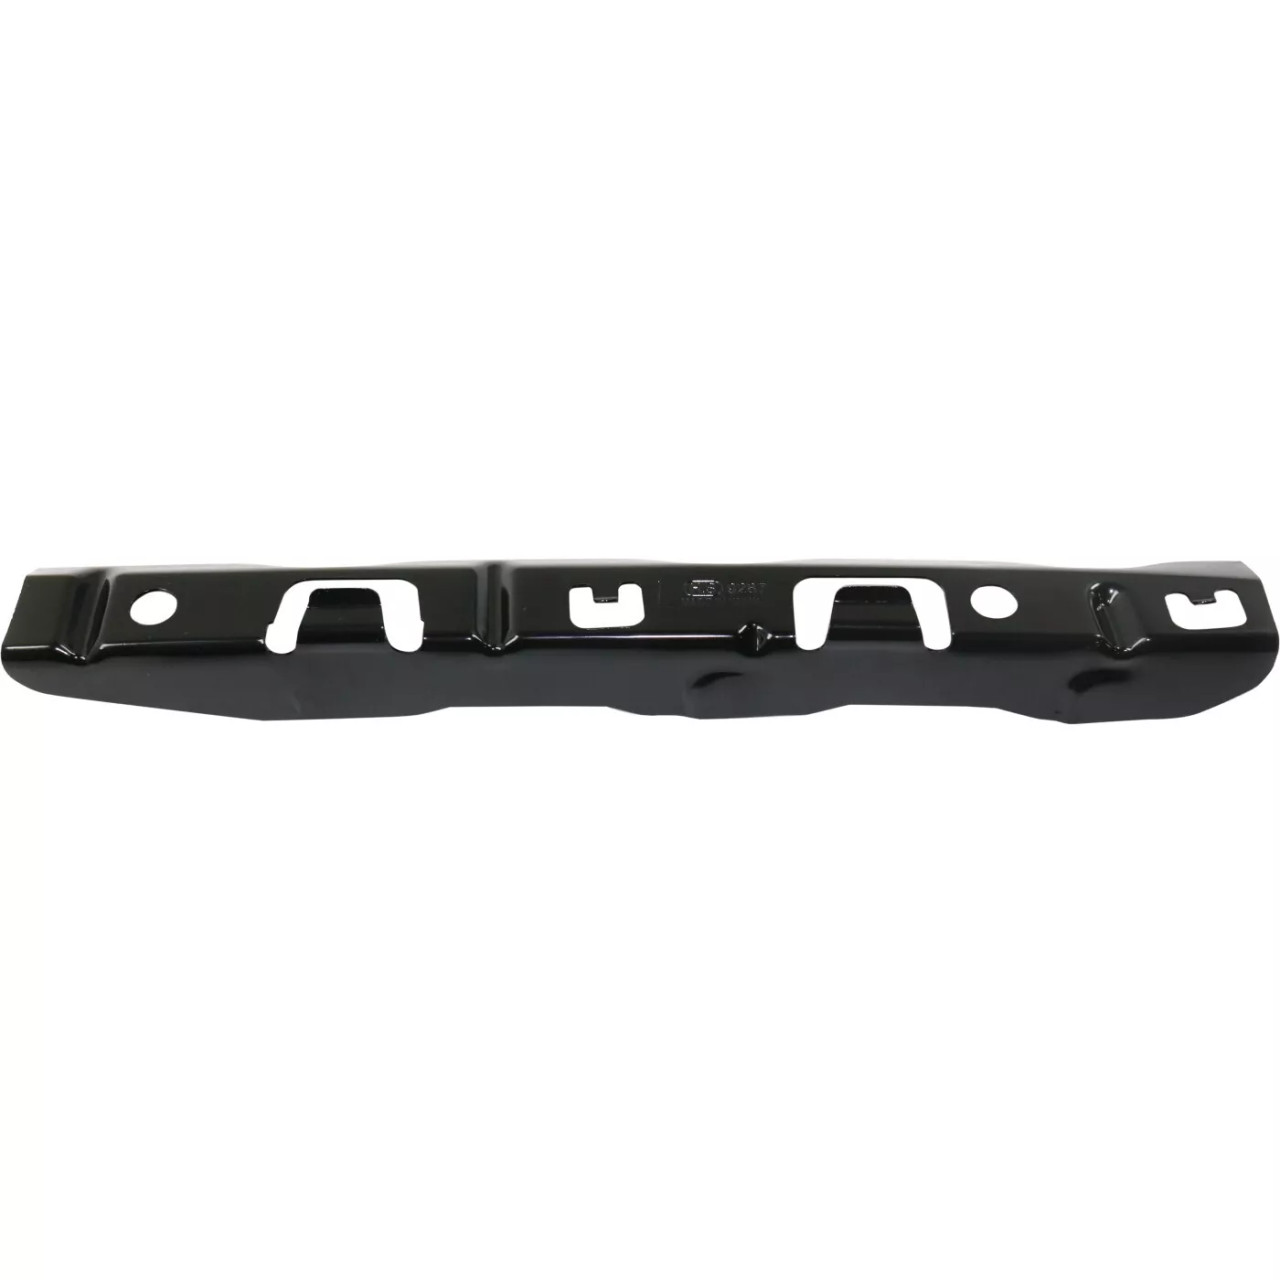 Bumper Bracket For 2007-2011 Toyota Camry Rear Left and Right Set of 2